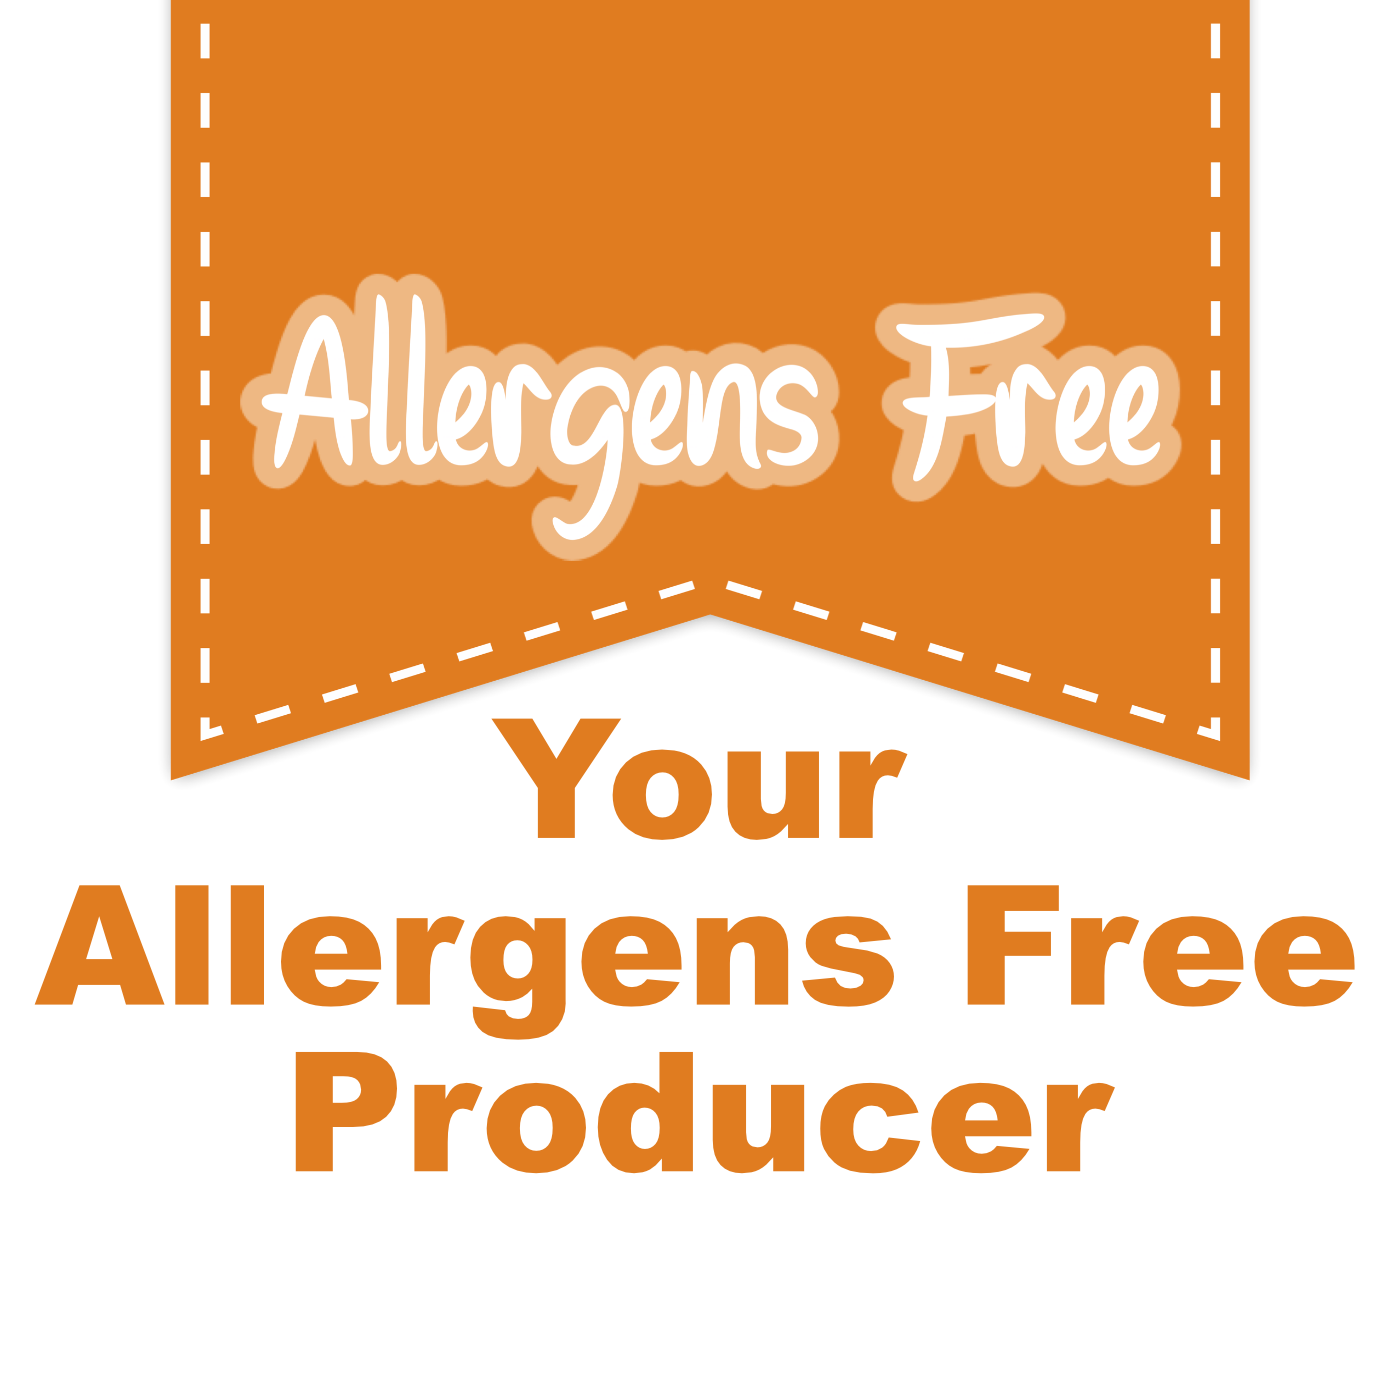 Your Allergens Free producer